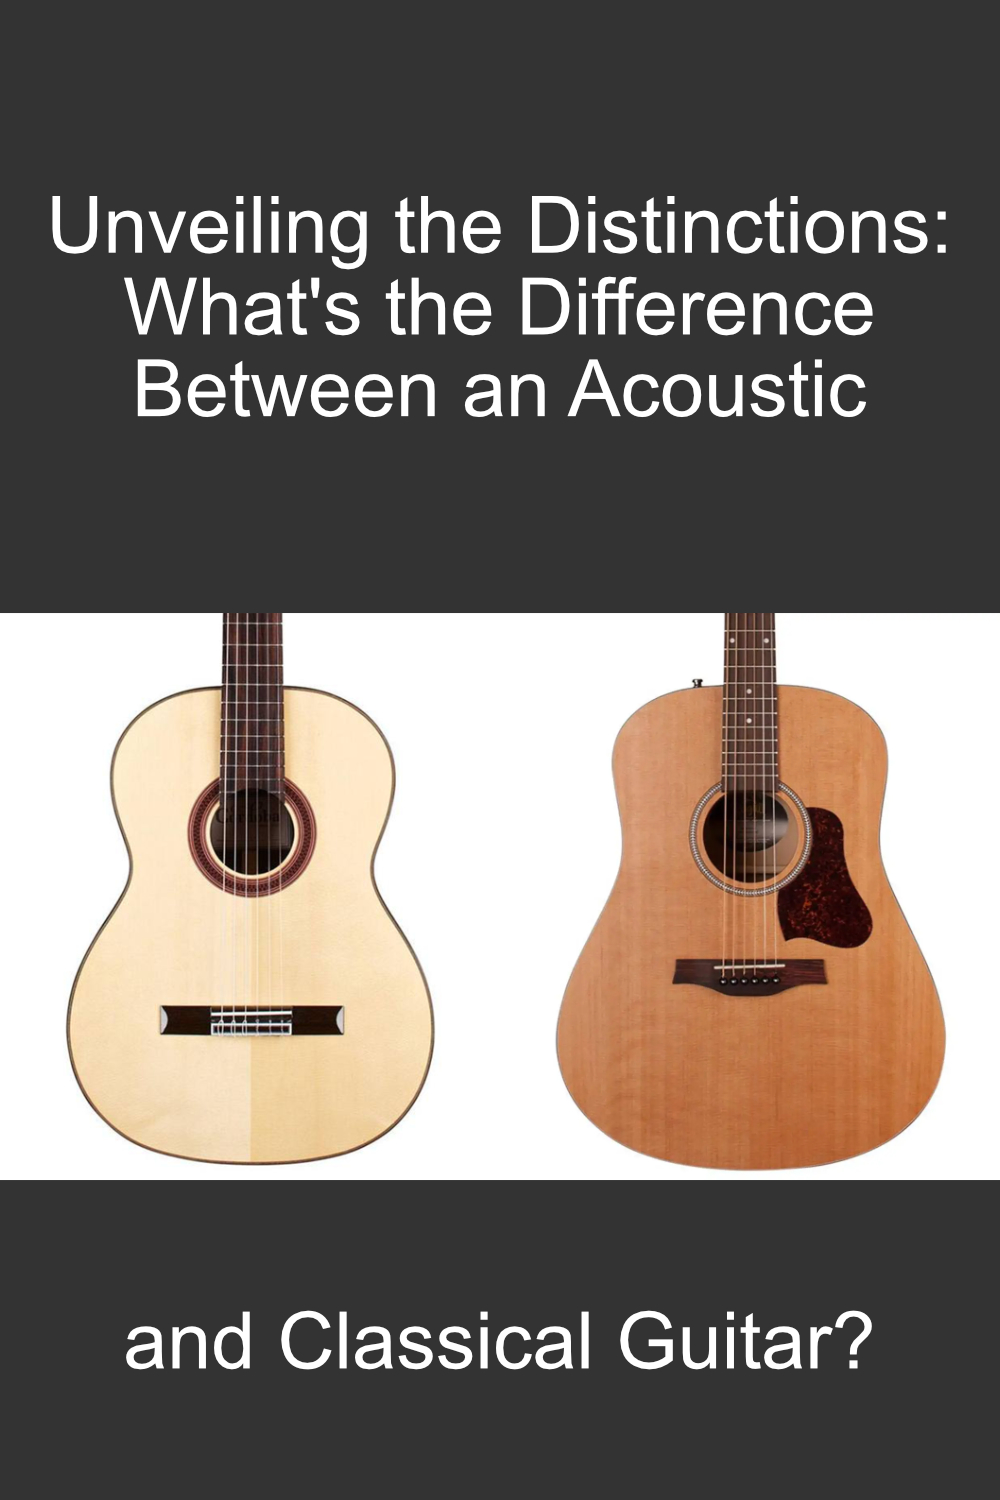 Unveiling the Distinctions: What’s the Difference Between an Acoustic and Classical Guitar